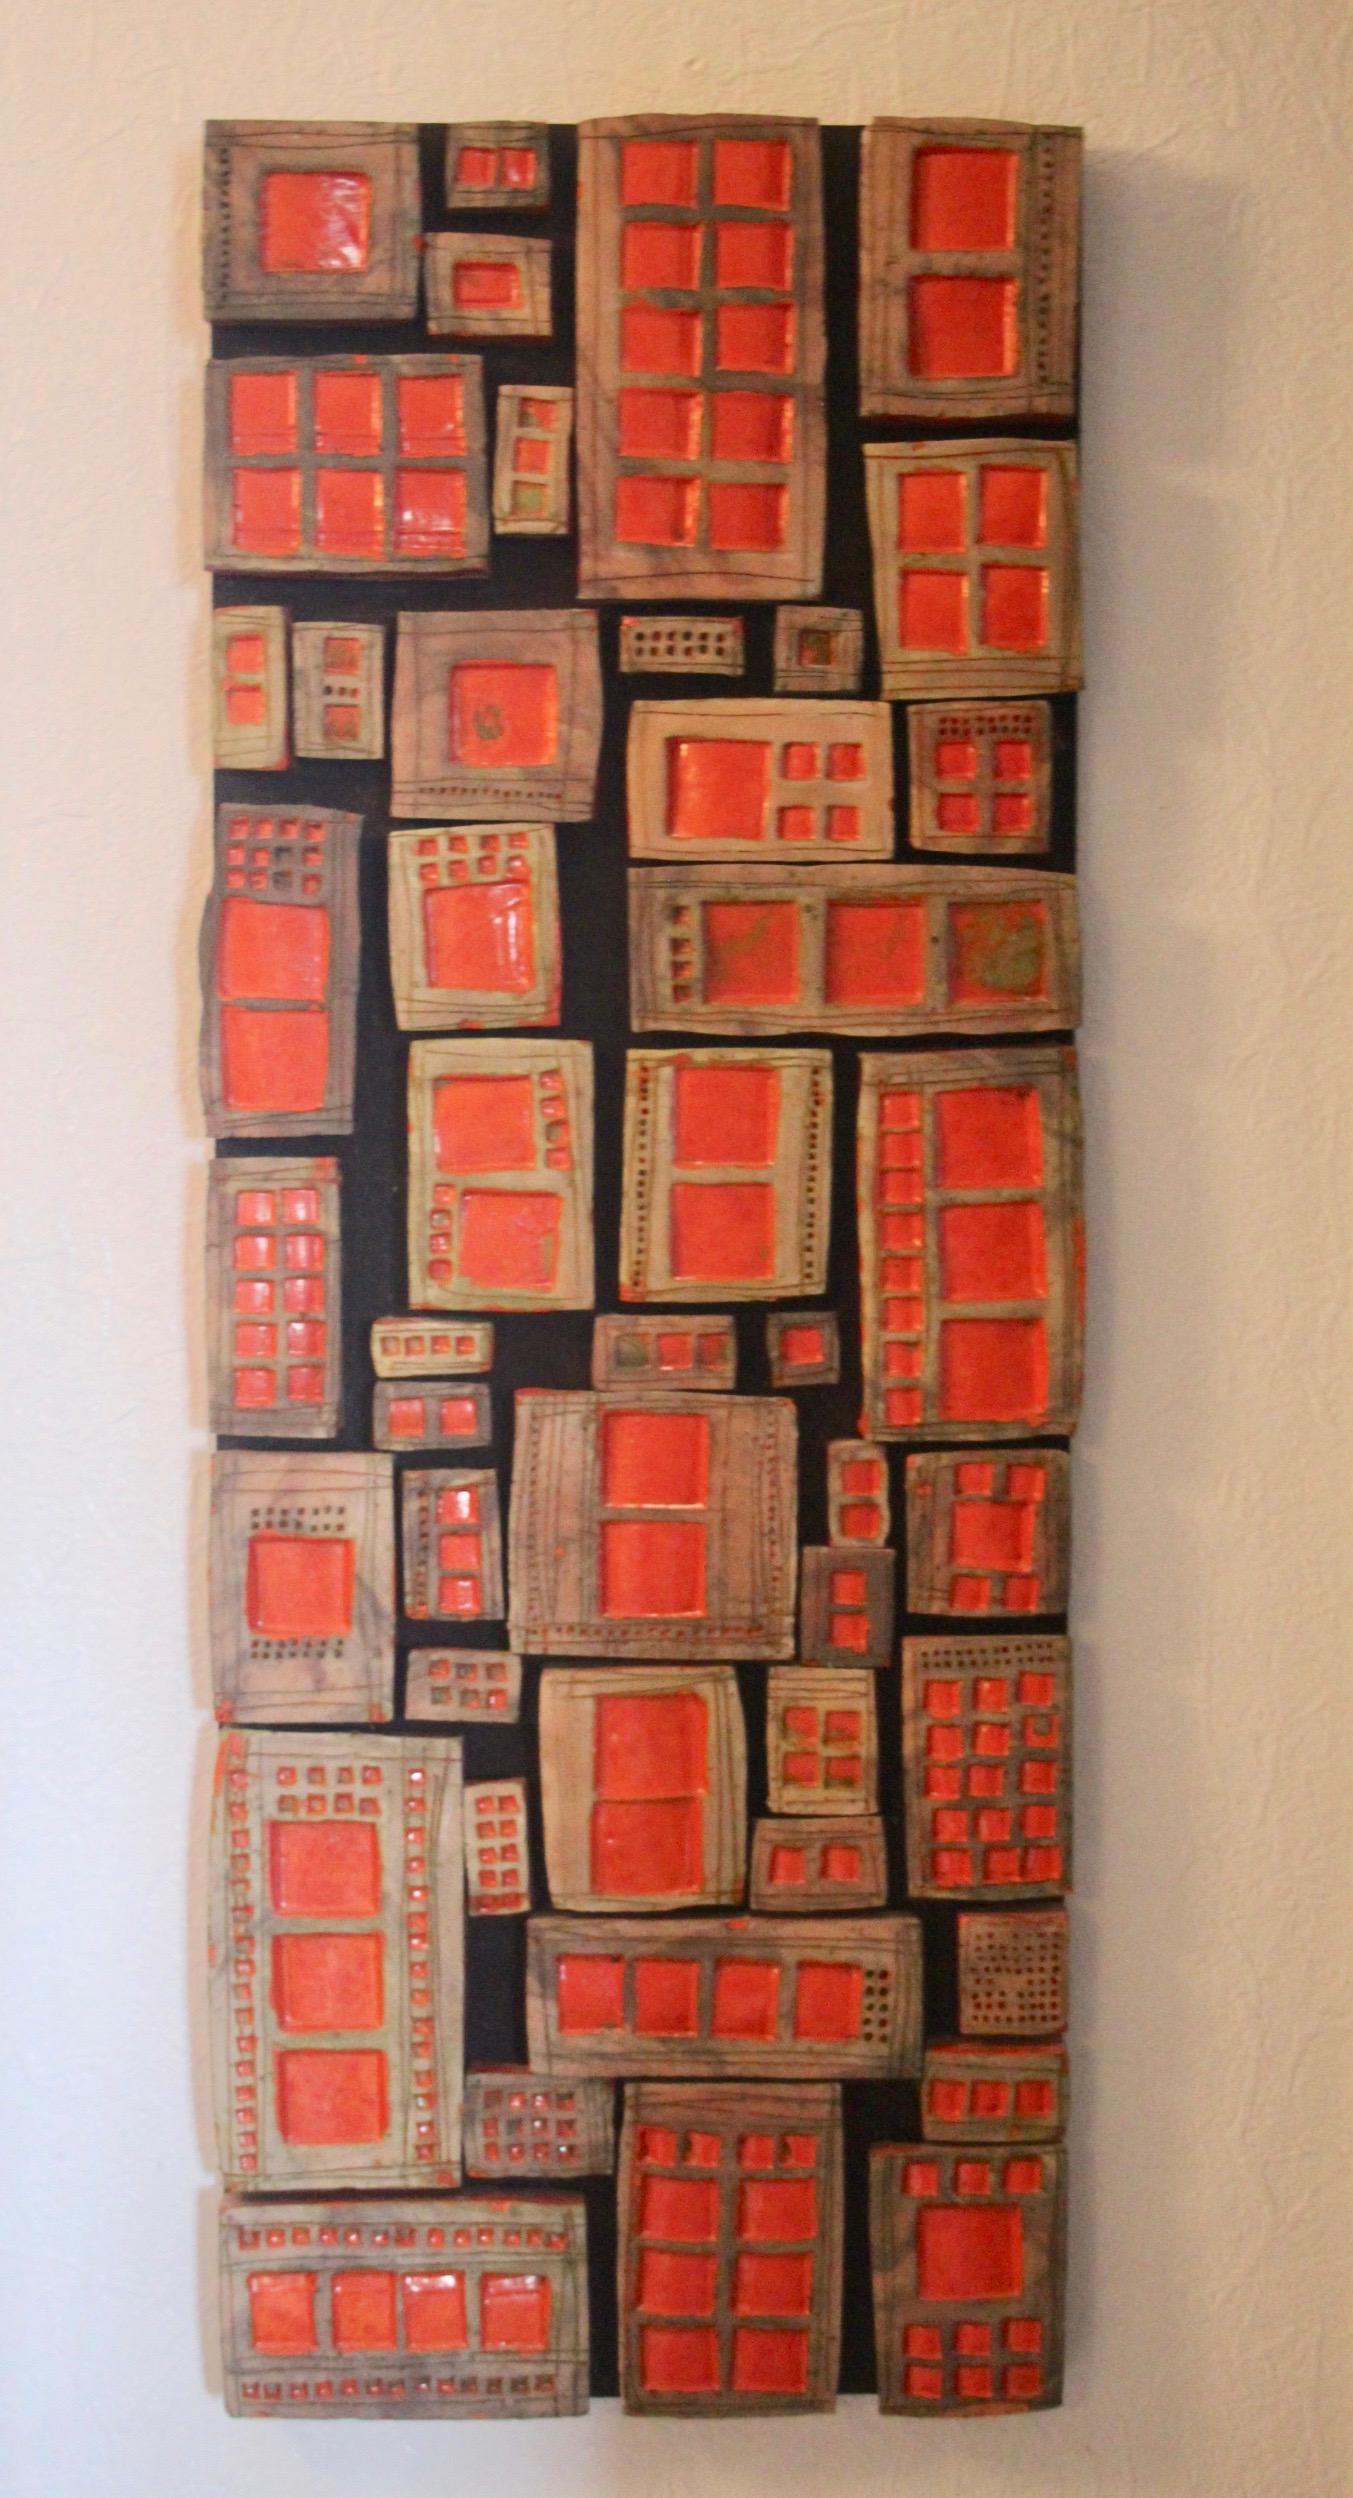 An assembly of individual ceramic blocks glued to a wood panel, representing a building or a block of houses. Similar to the work of French ceramist Roger Capron.